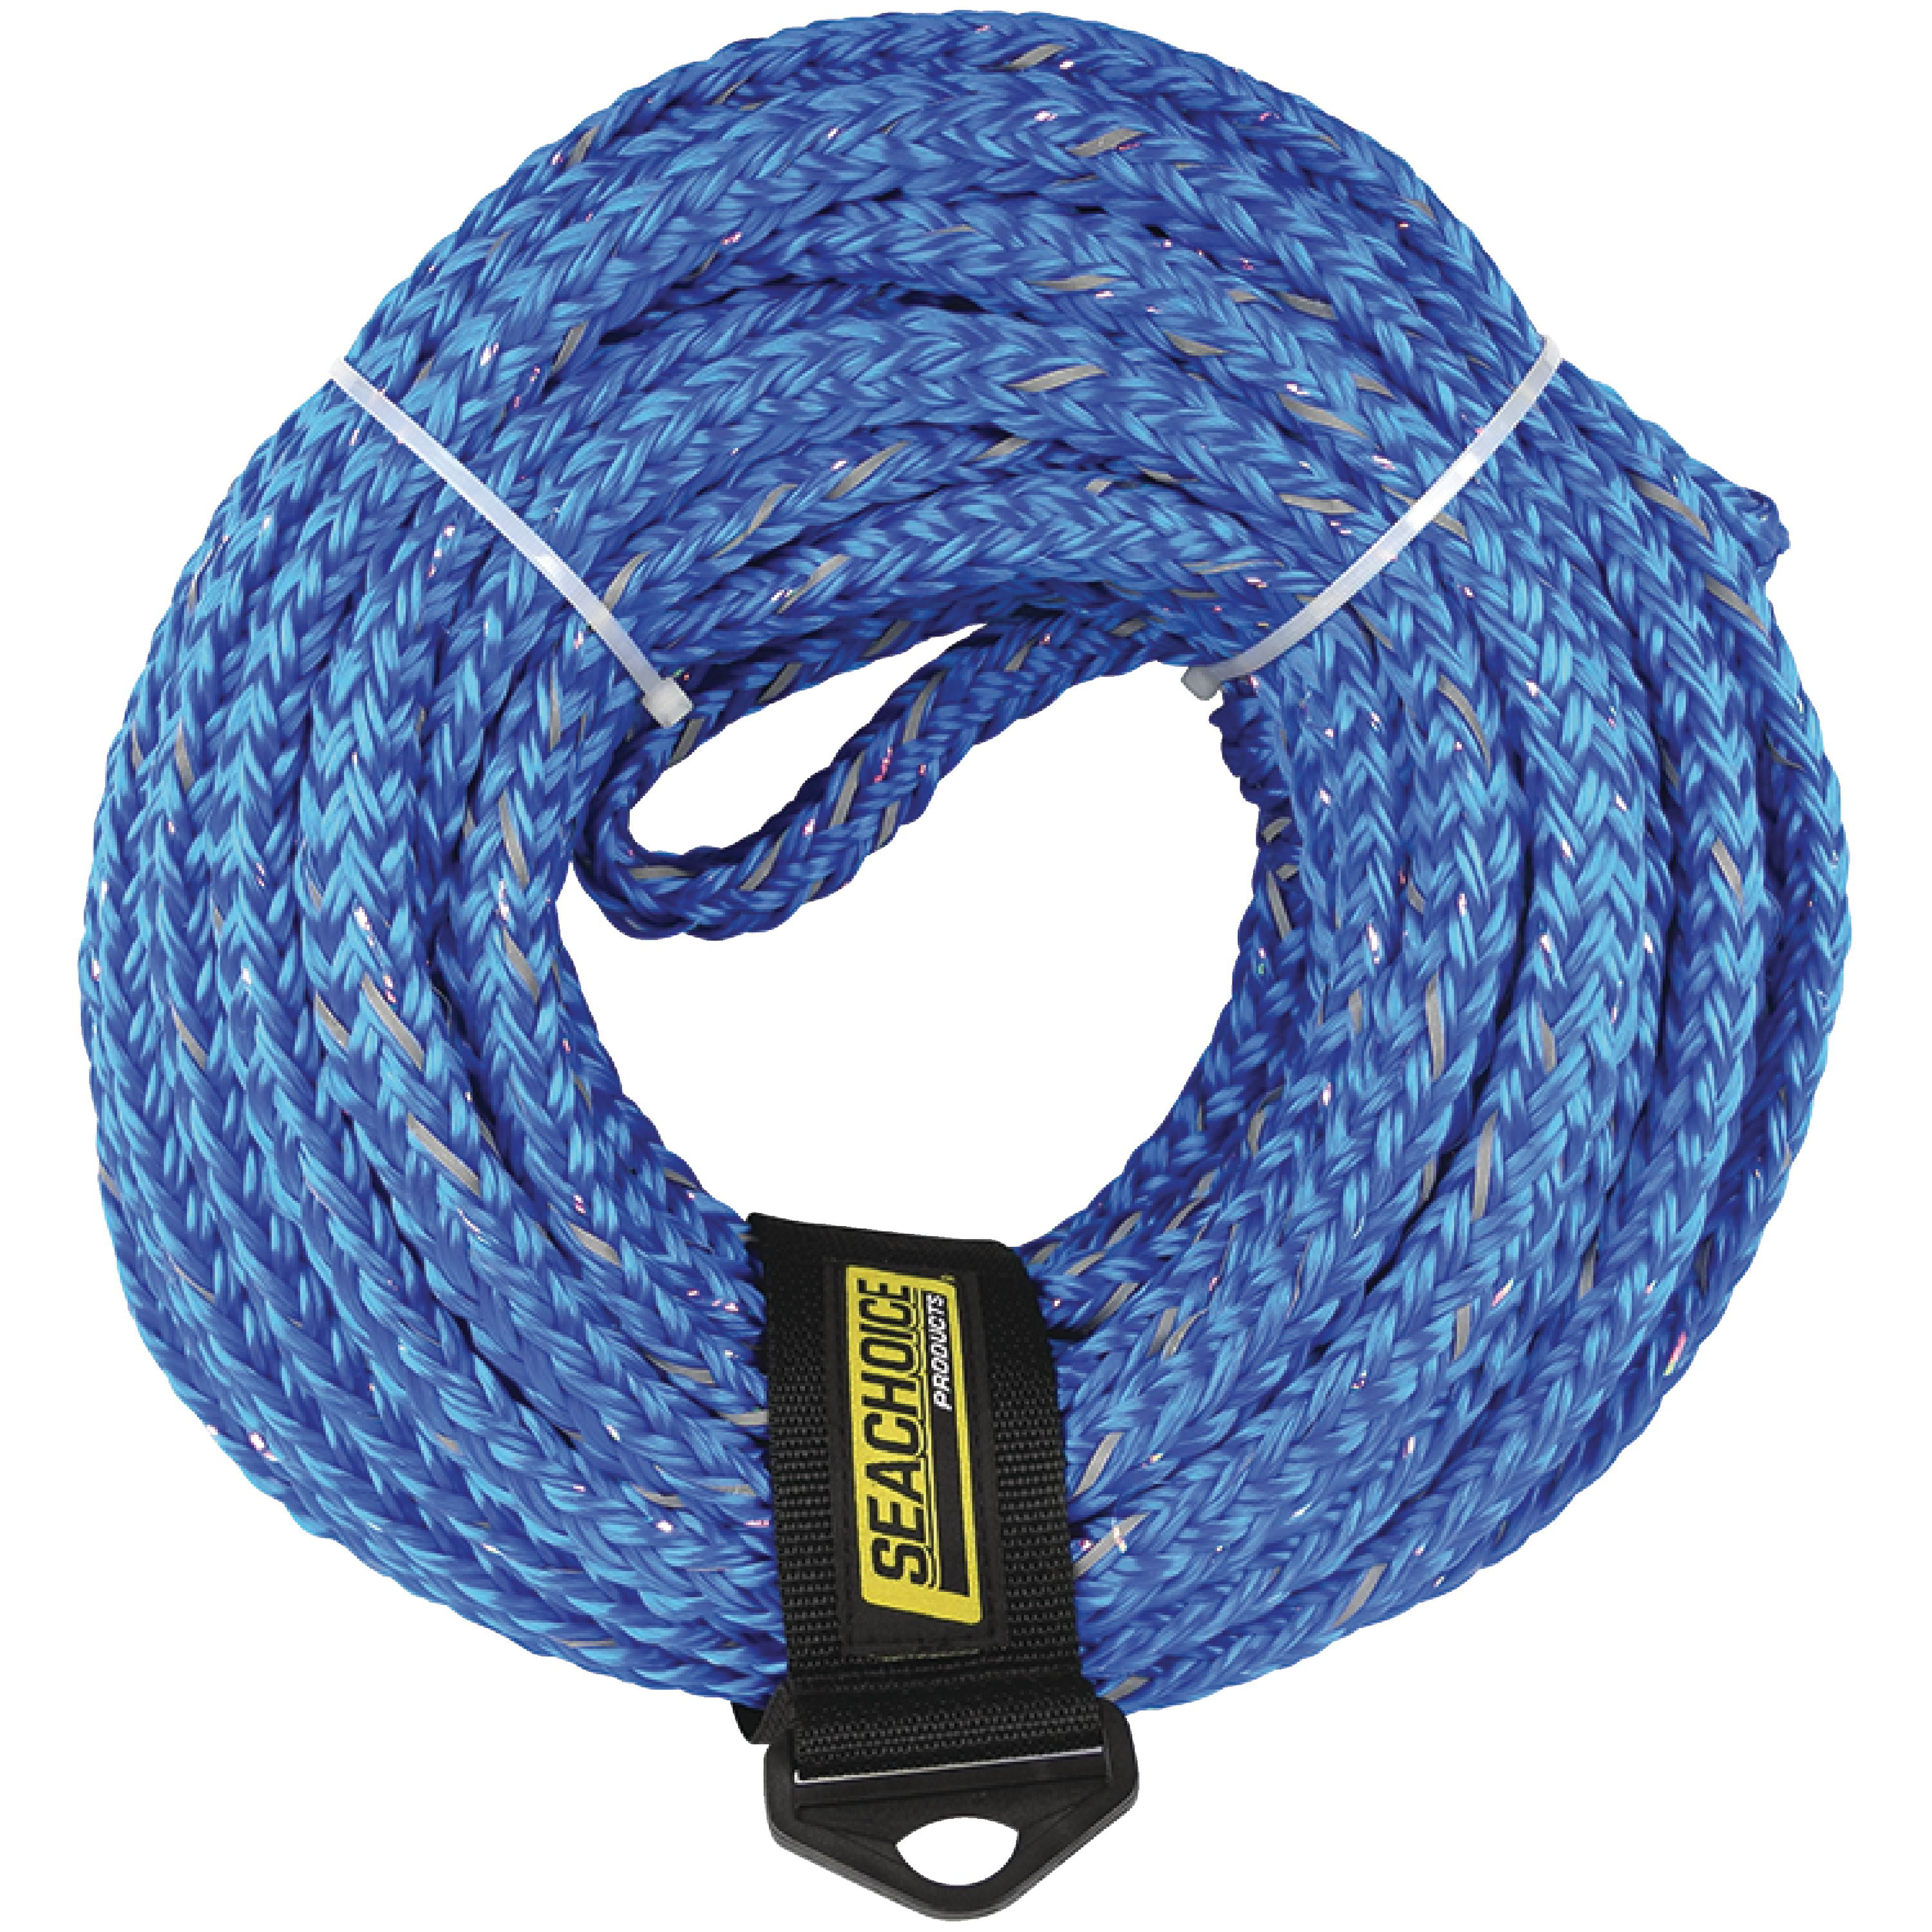 Proline 4-Rider Value Safety Tube Tow Rope - Walmart.com